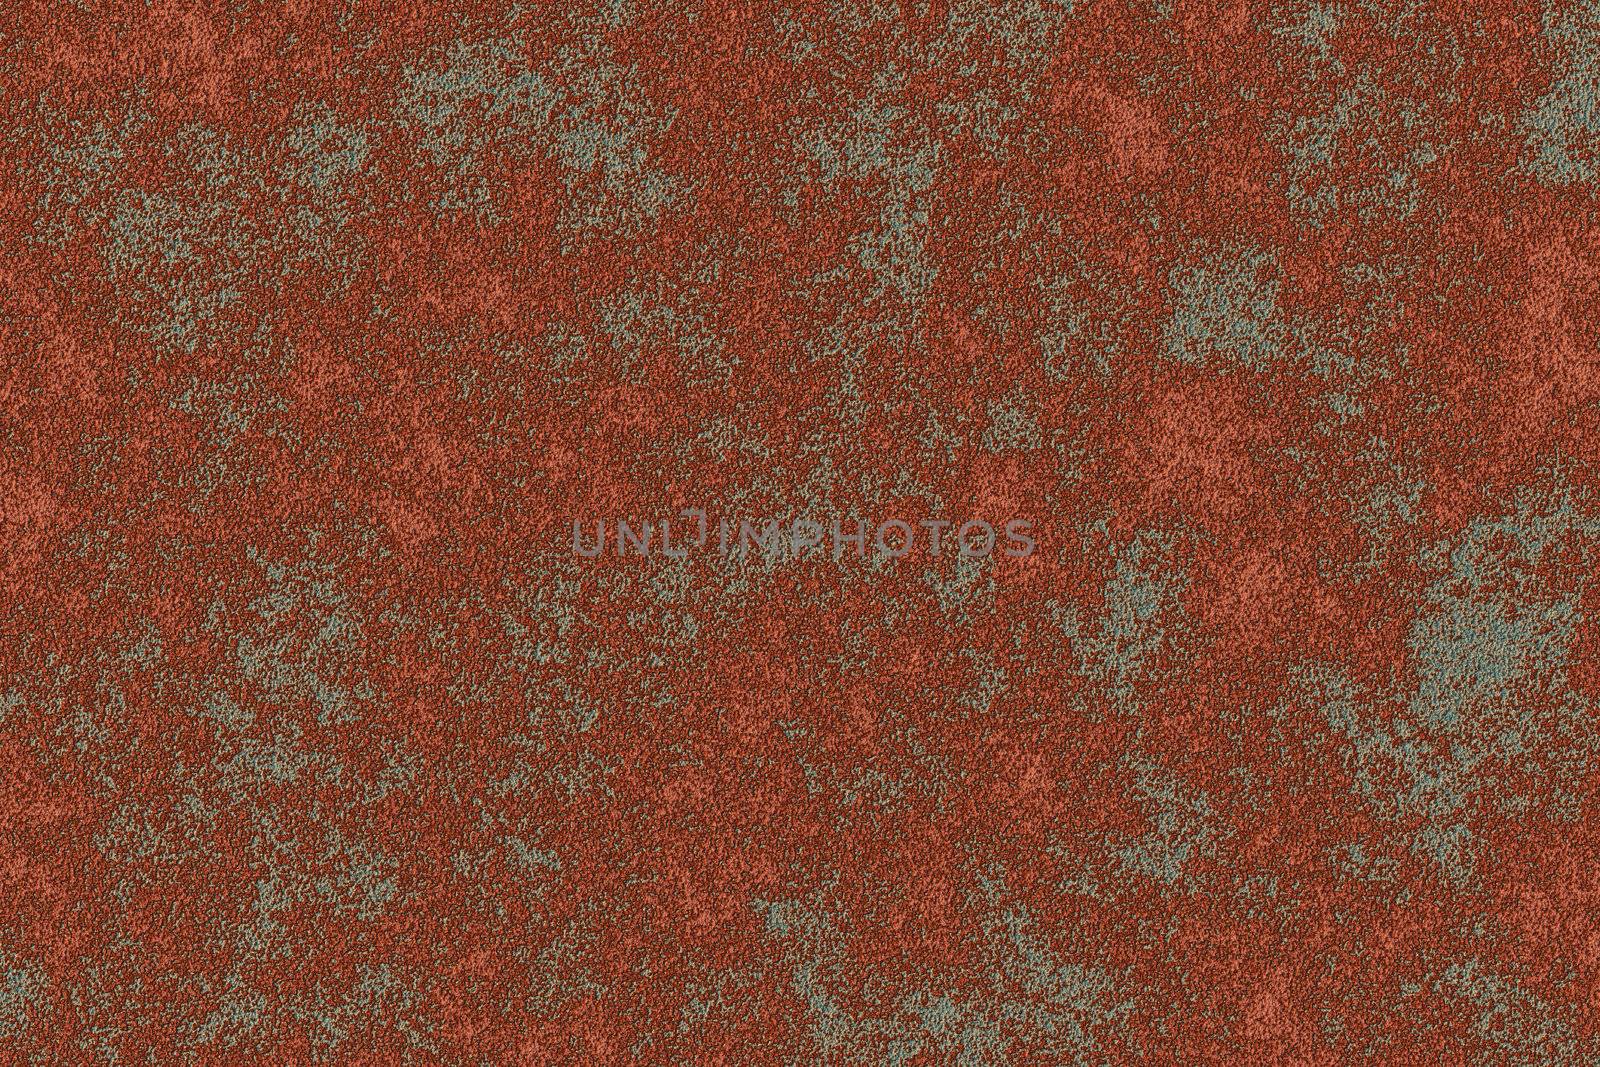 Red rust on metall background